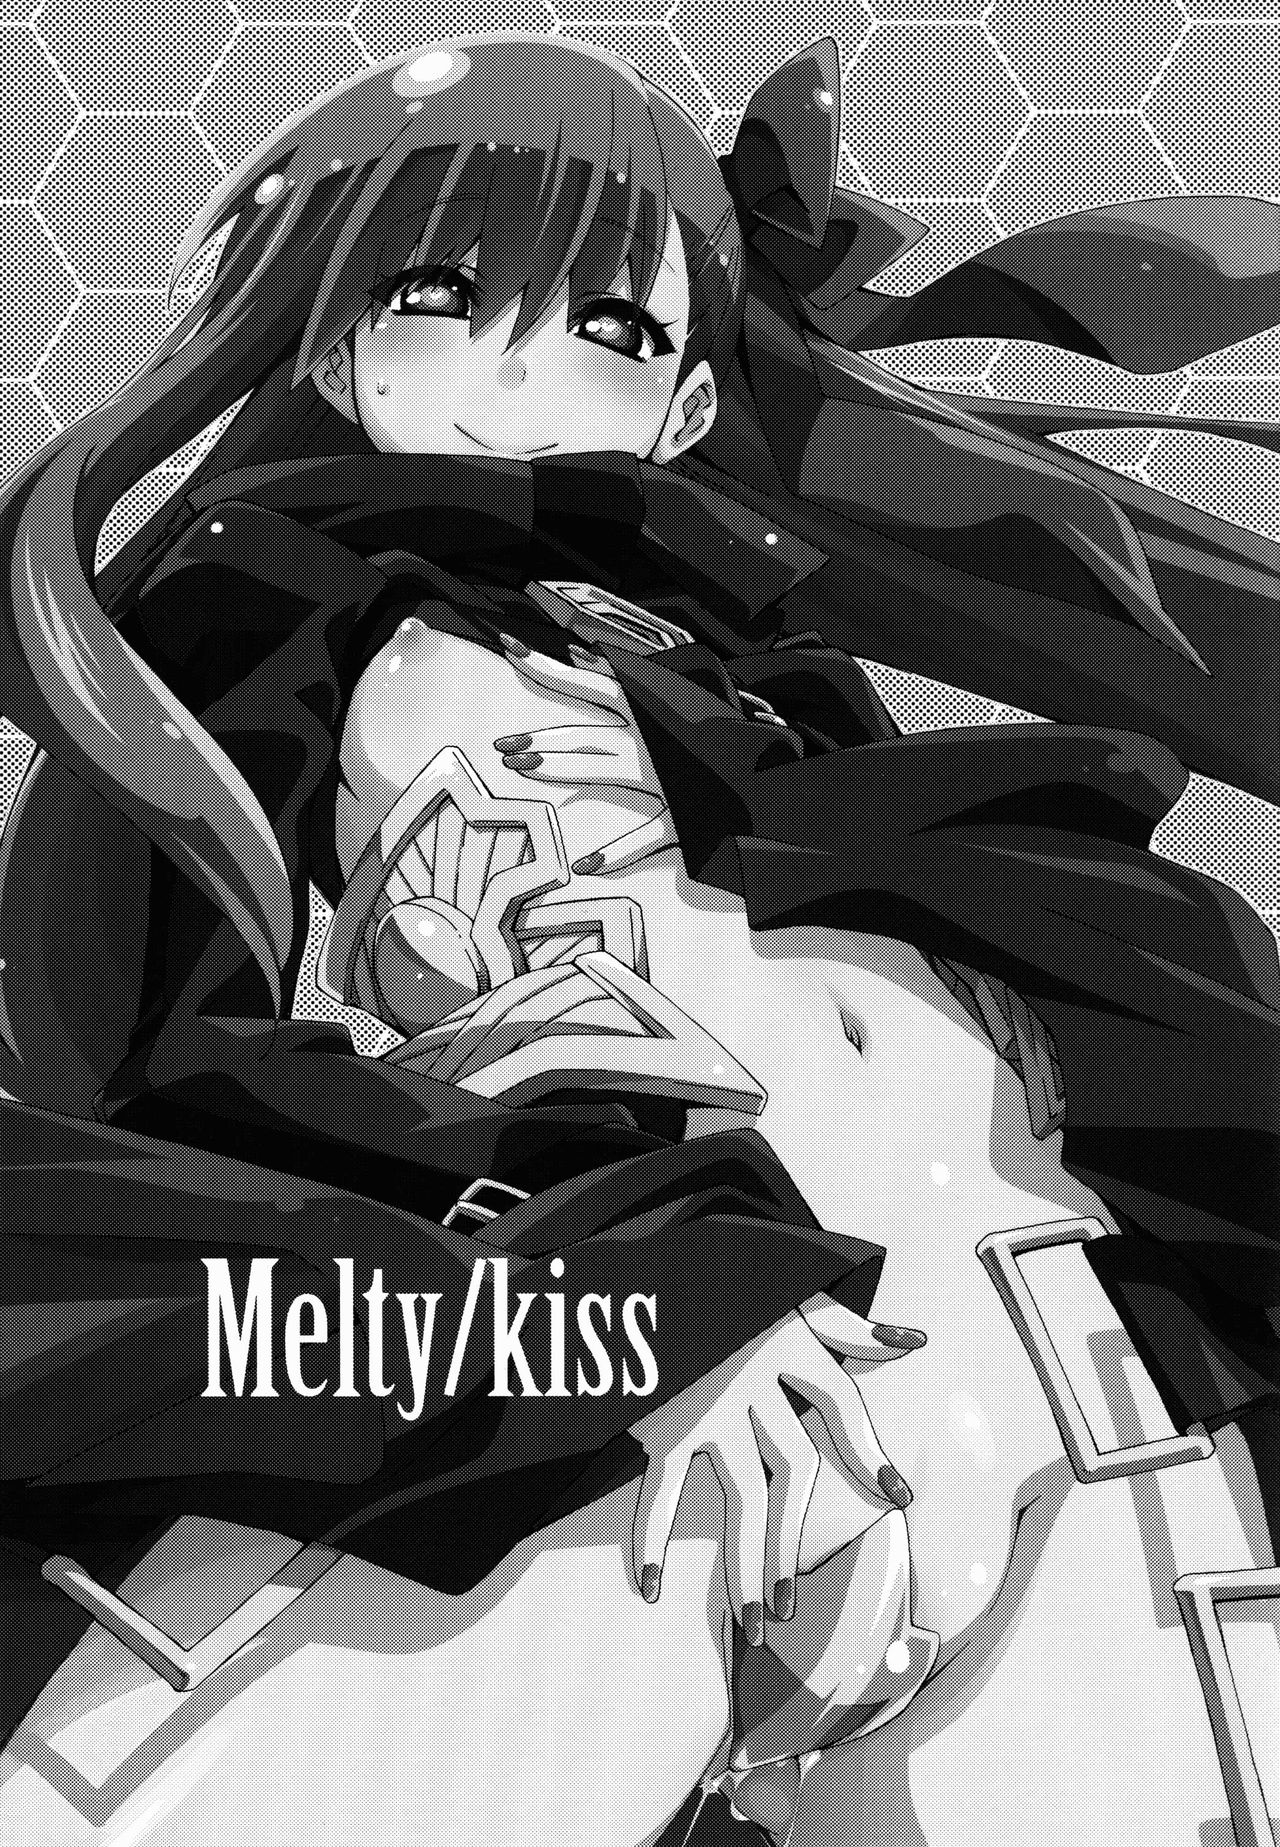 (C85) [カリーバーグディッシュ (未影)] Melty/kiss (Fate/EXTRA) [英訳]